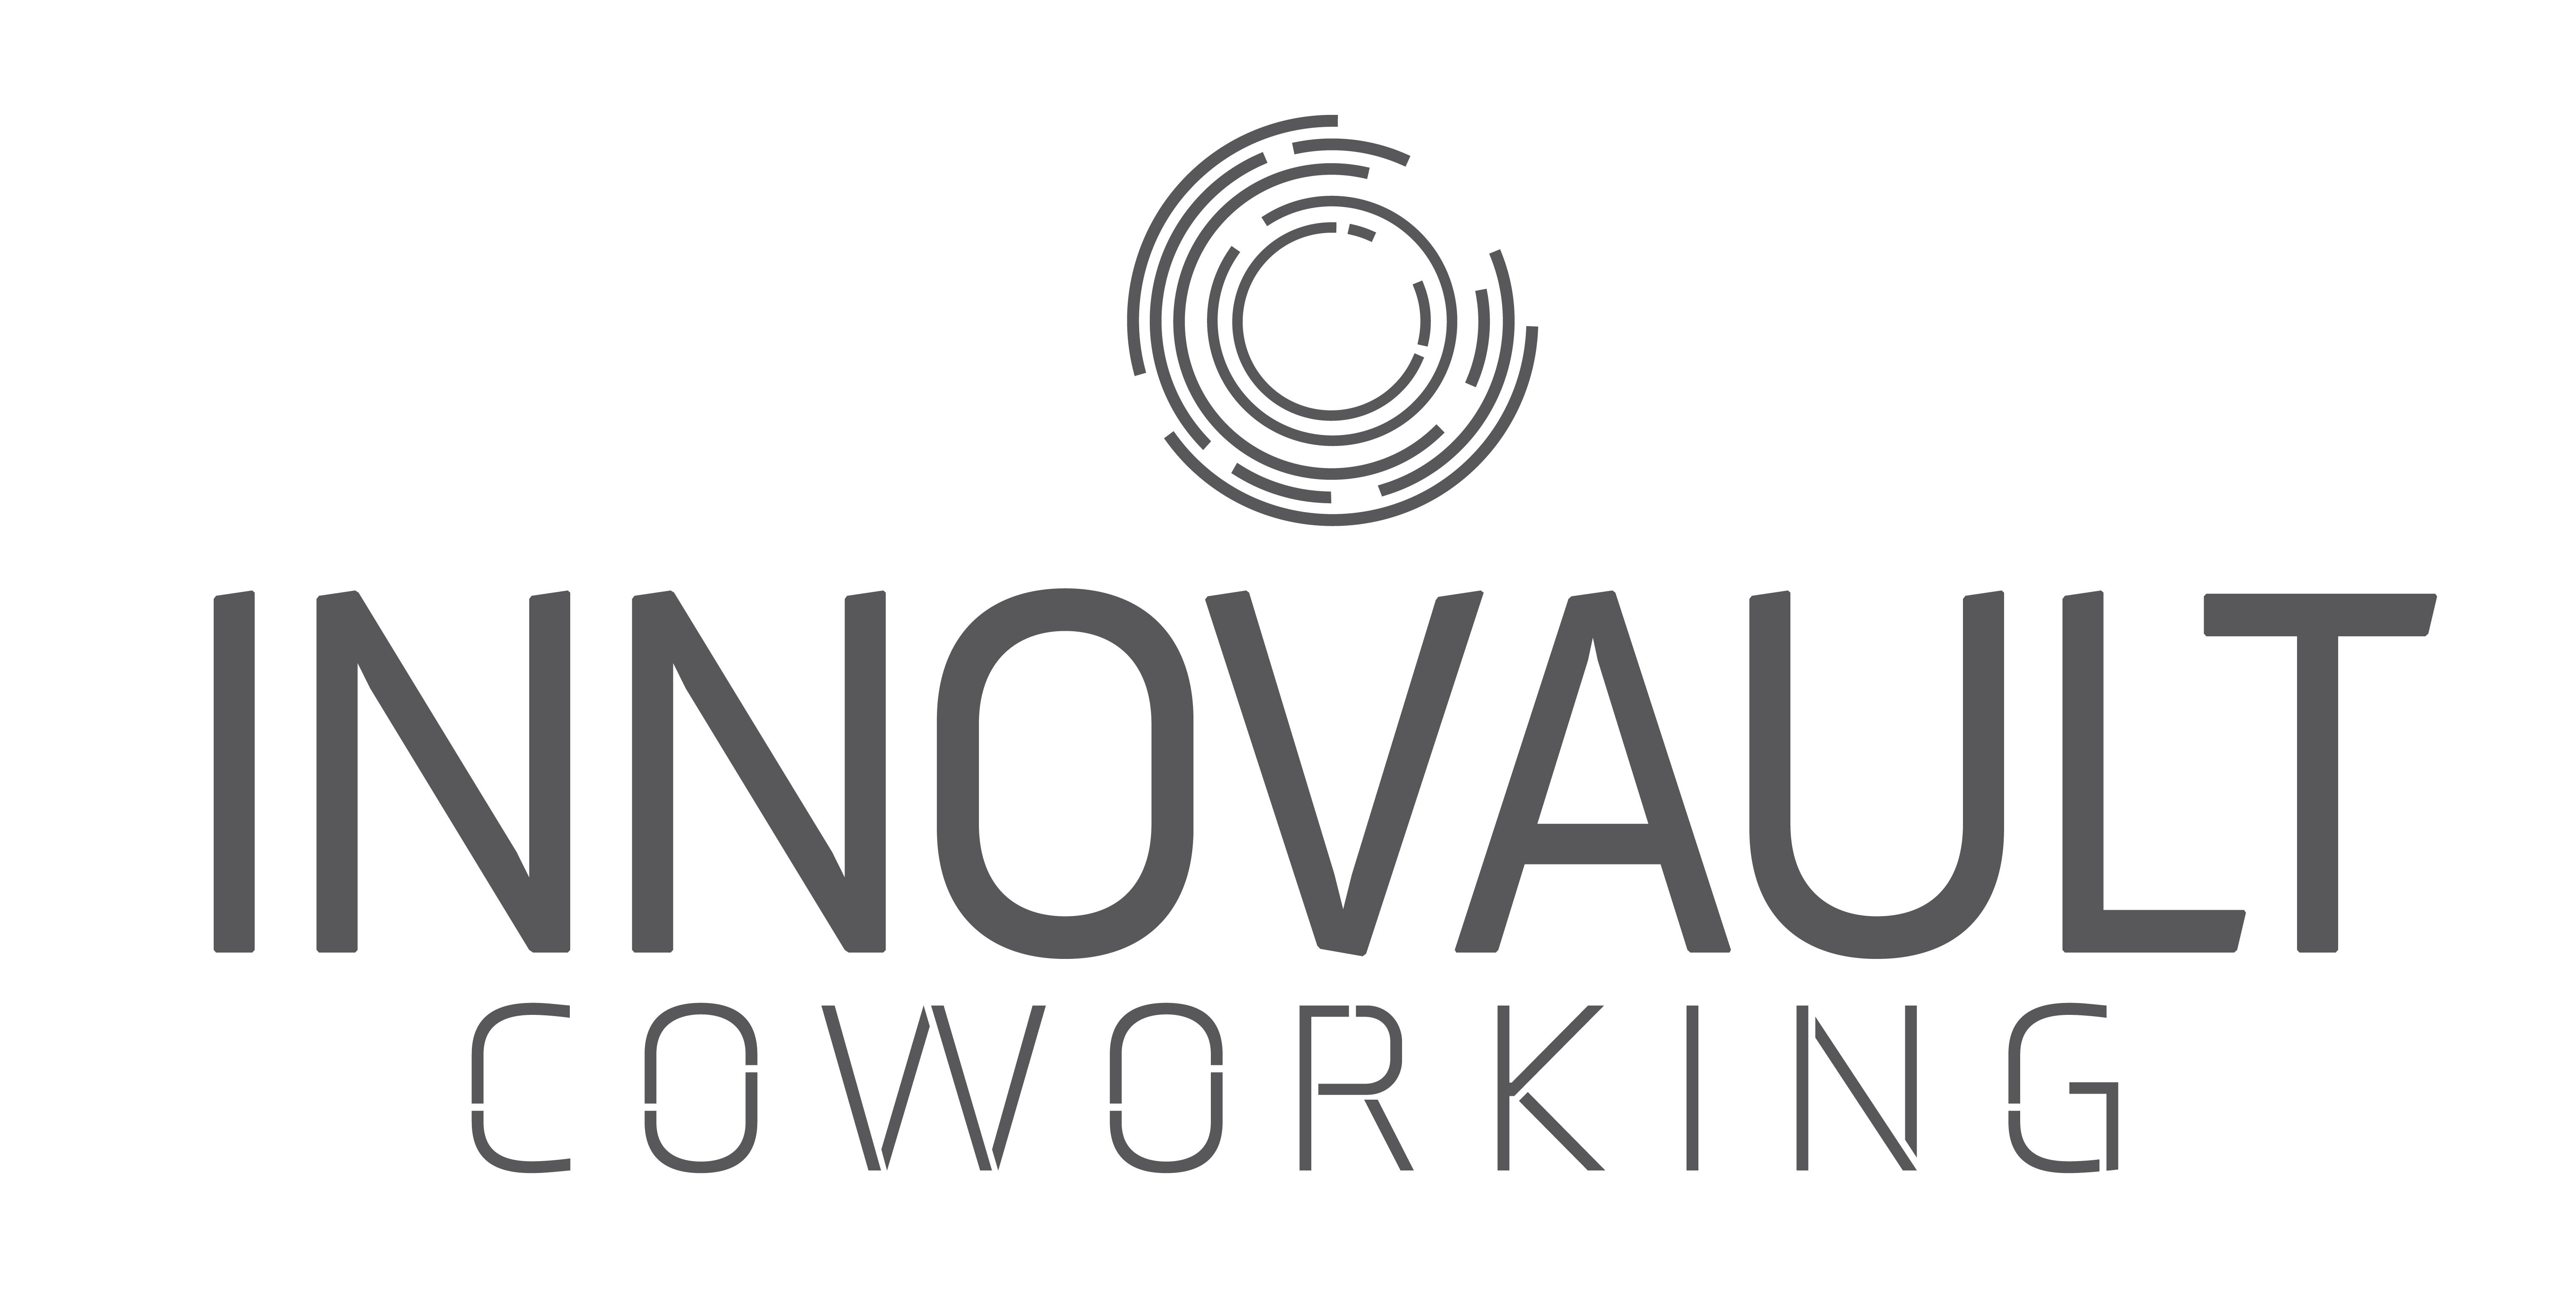 Innovault Coworking